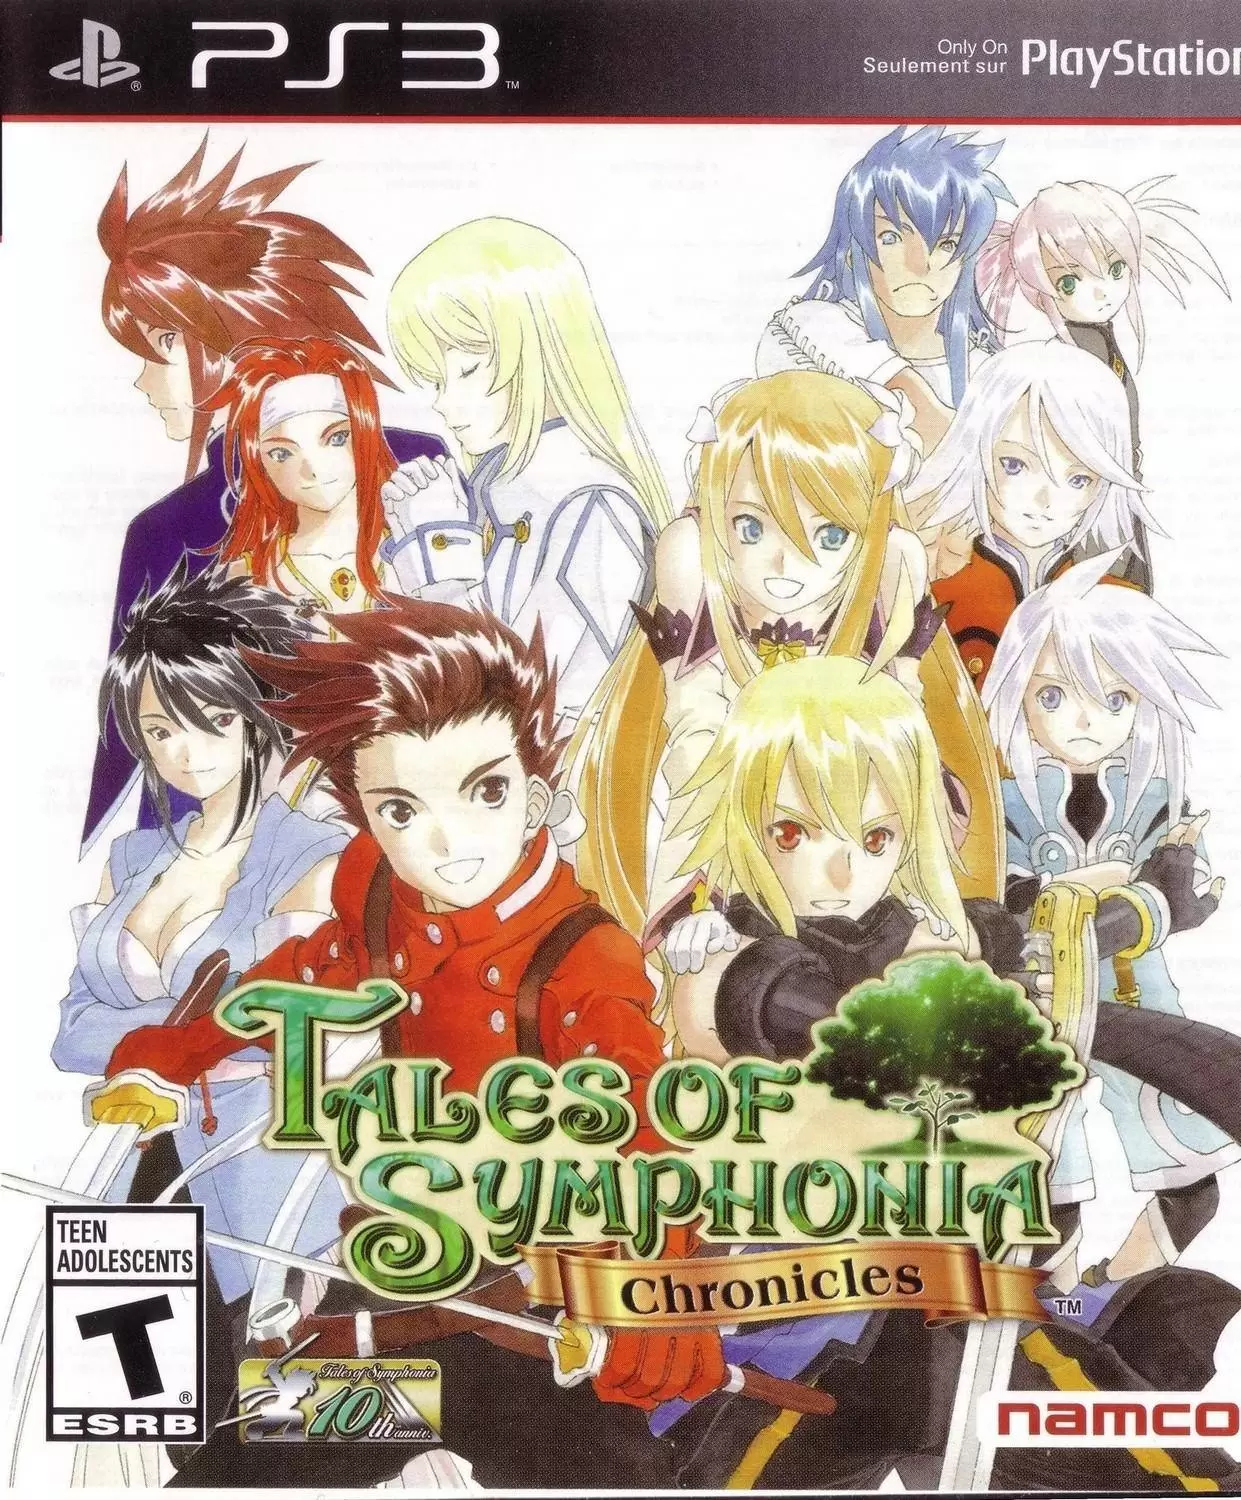 PS3 Games - Tales of Symphonia Chronicles